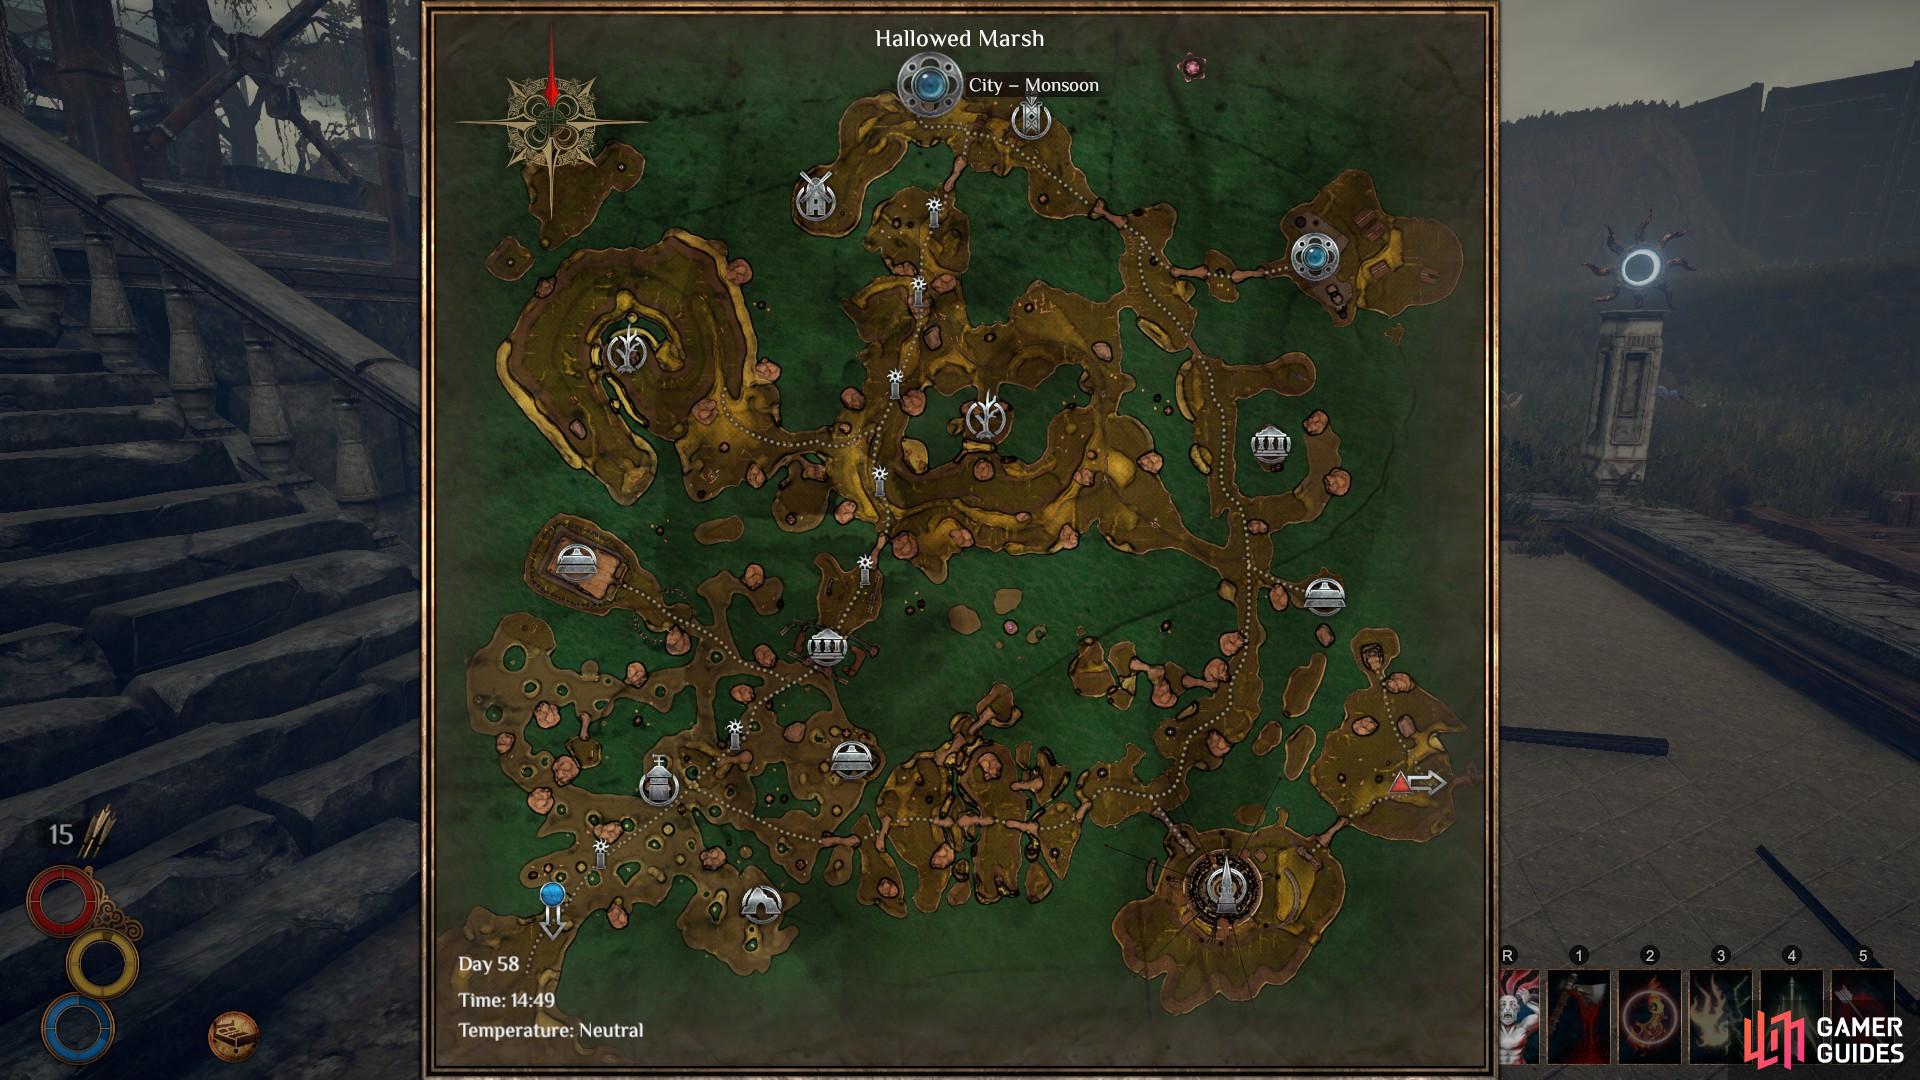 The city of Monsoon as shown on the map of Hallowed Marsh. You can reach the city from the region of Chersonese, marked here by a blue circle in the south west, or from the region of Enmerkar forest, marked here by a red triangle in the south east.